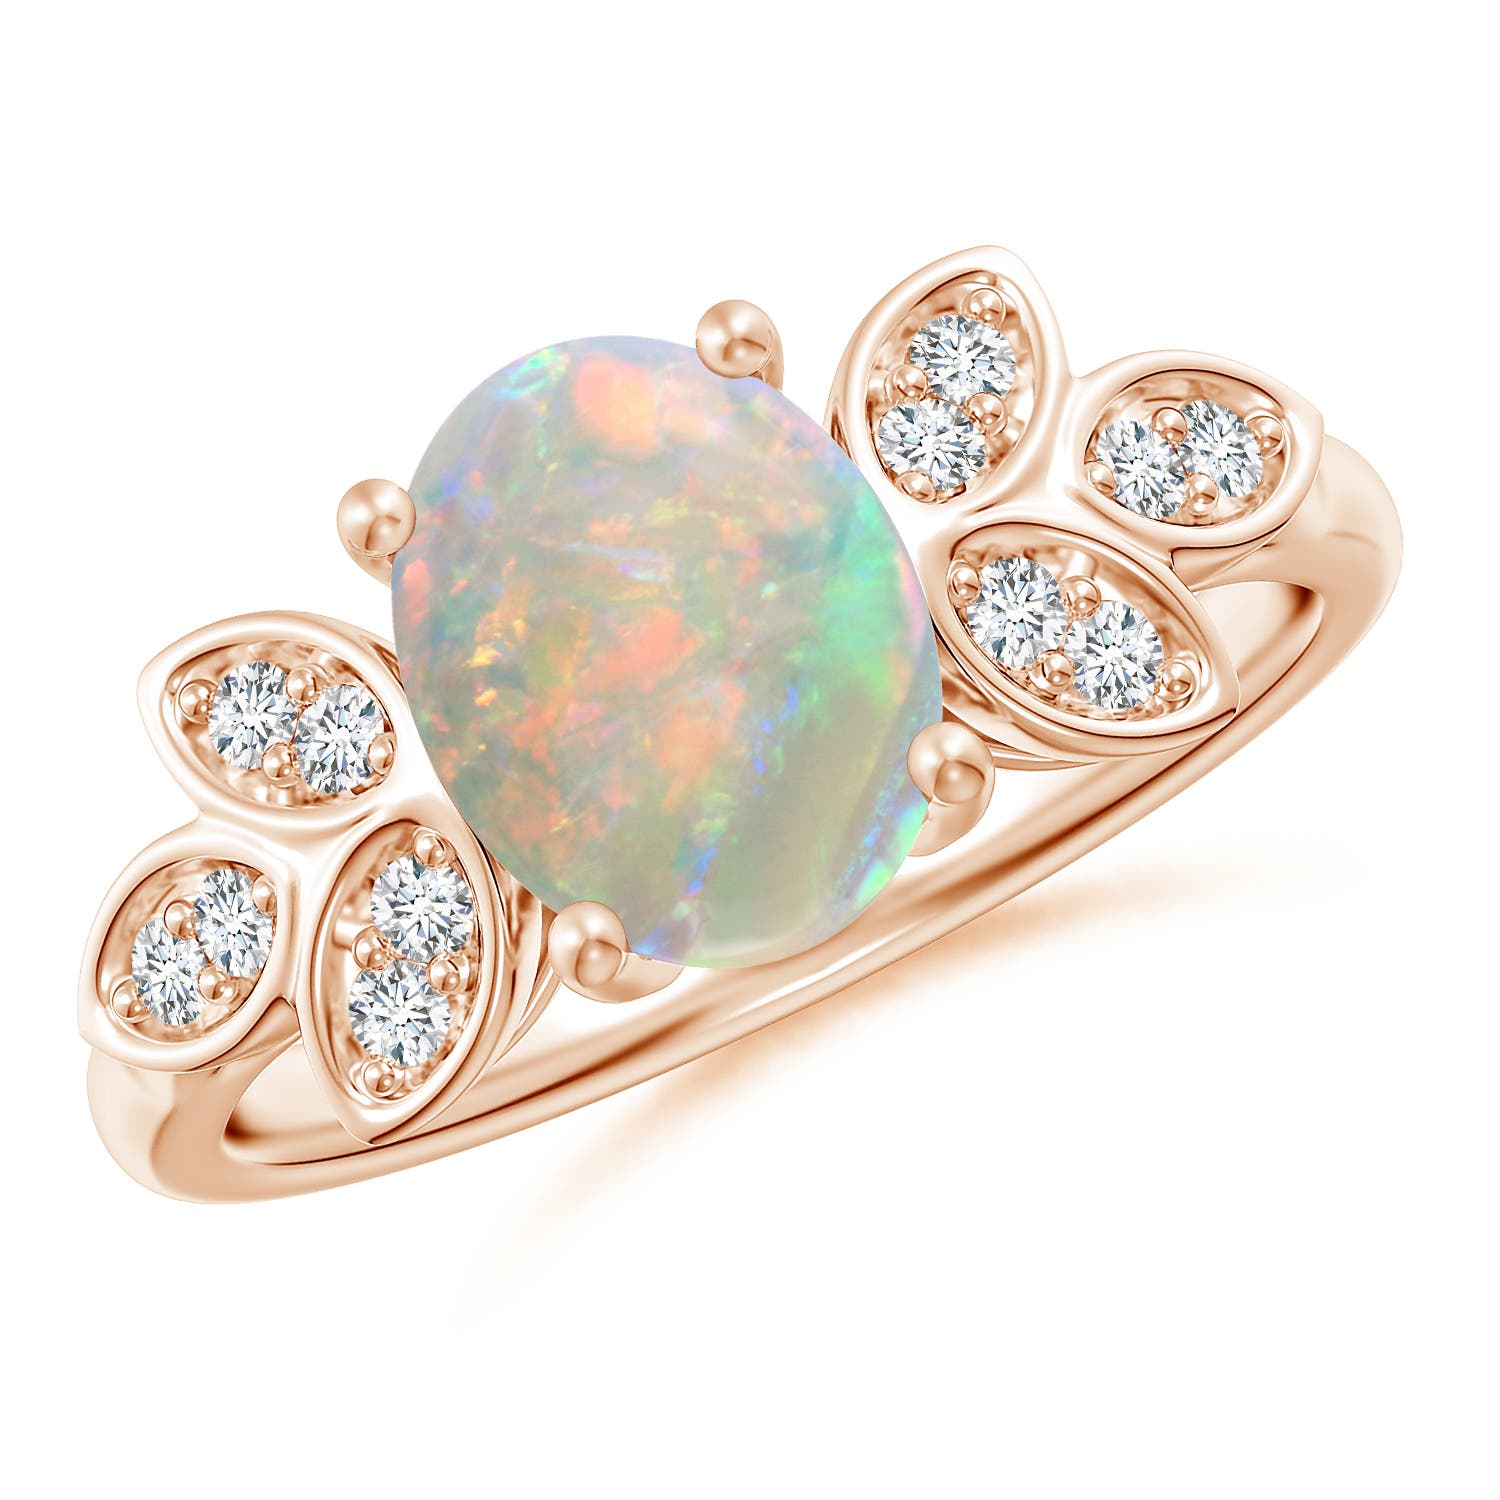 Vintage Style Oval Opal Ring with Diamond Accents | Angara